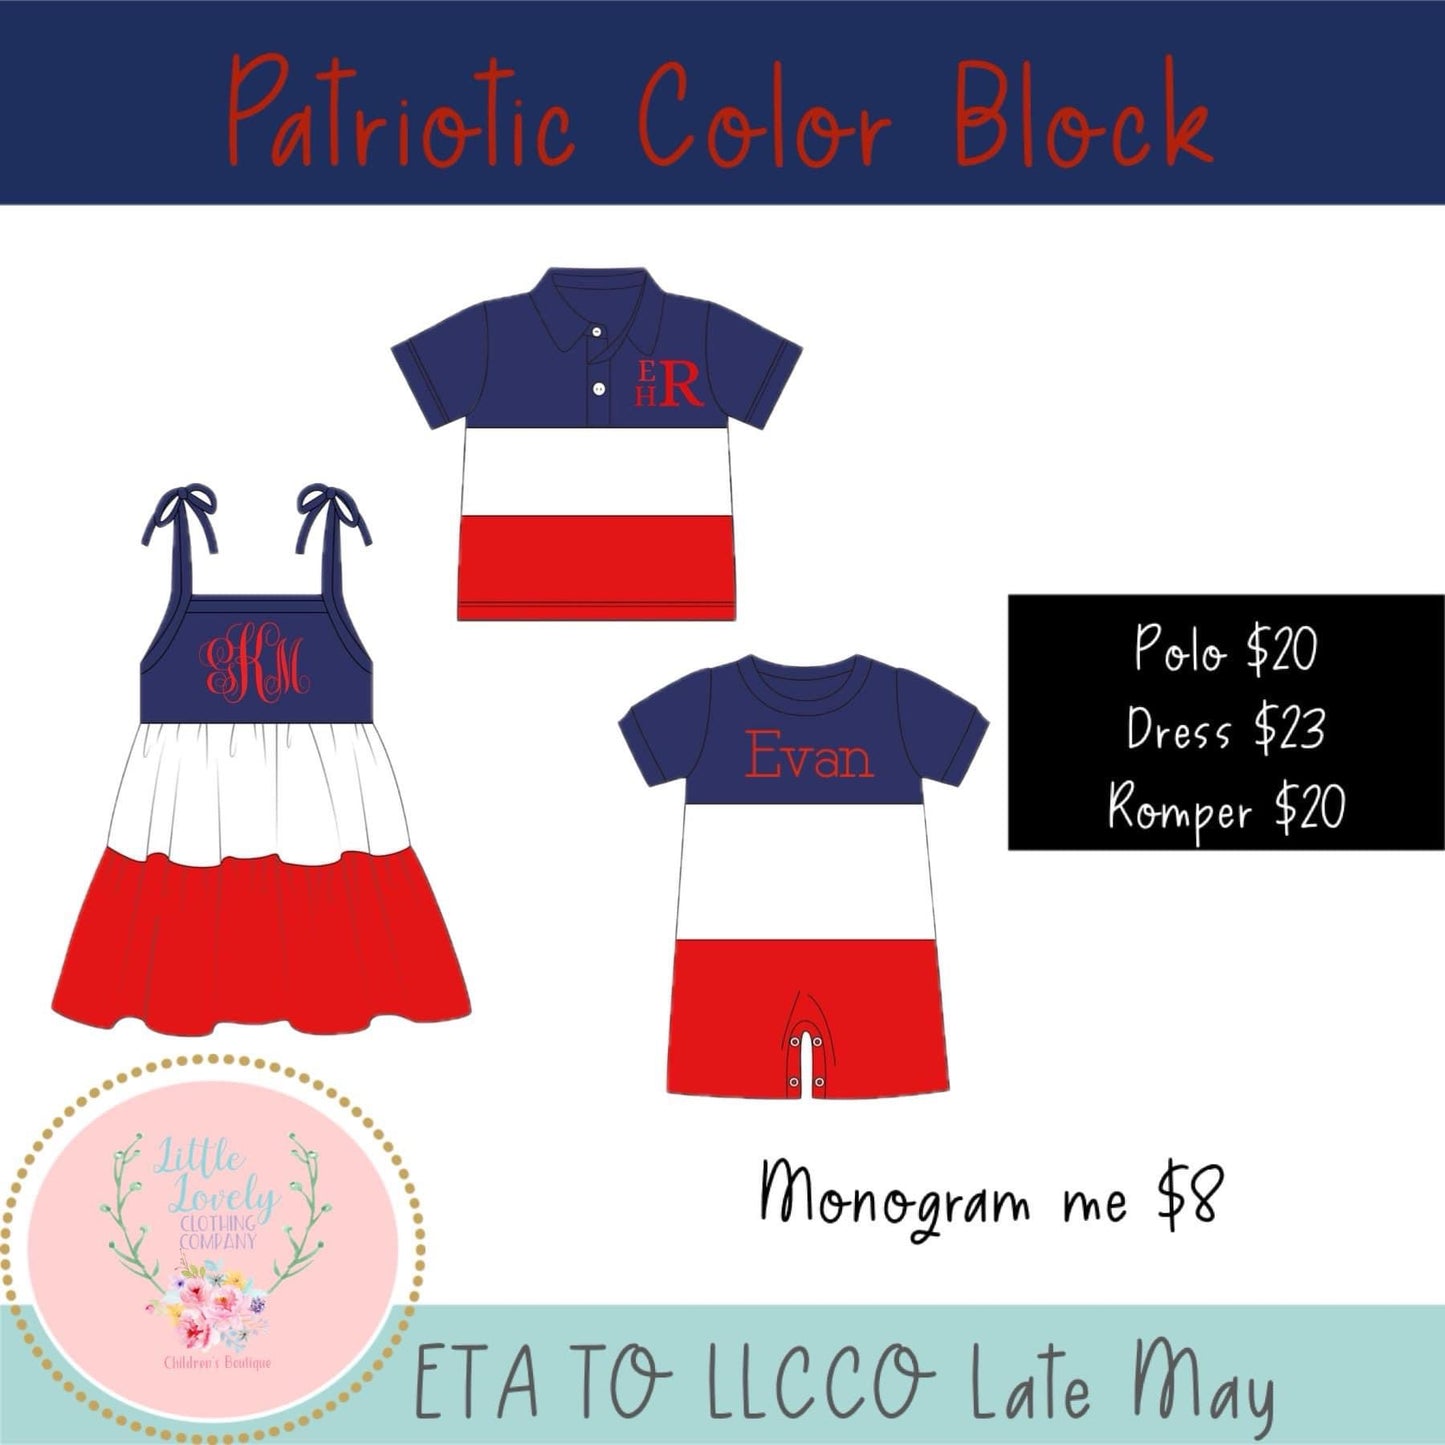 Patriotic Color Block Collection, Presale ETA: Late May to LLCCO, then to customers